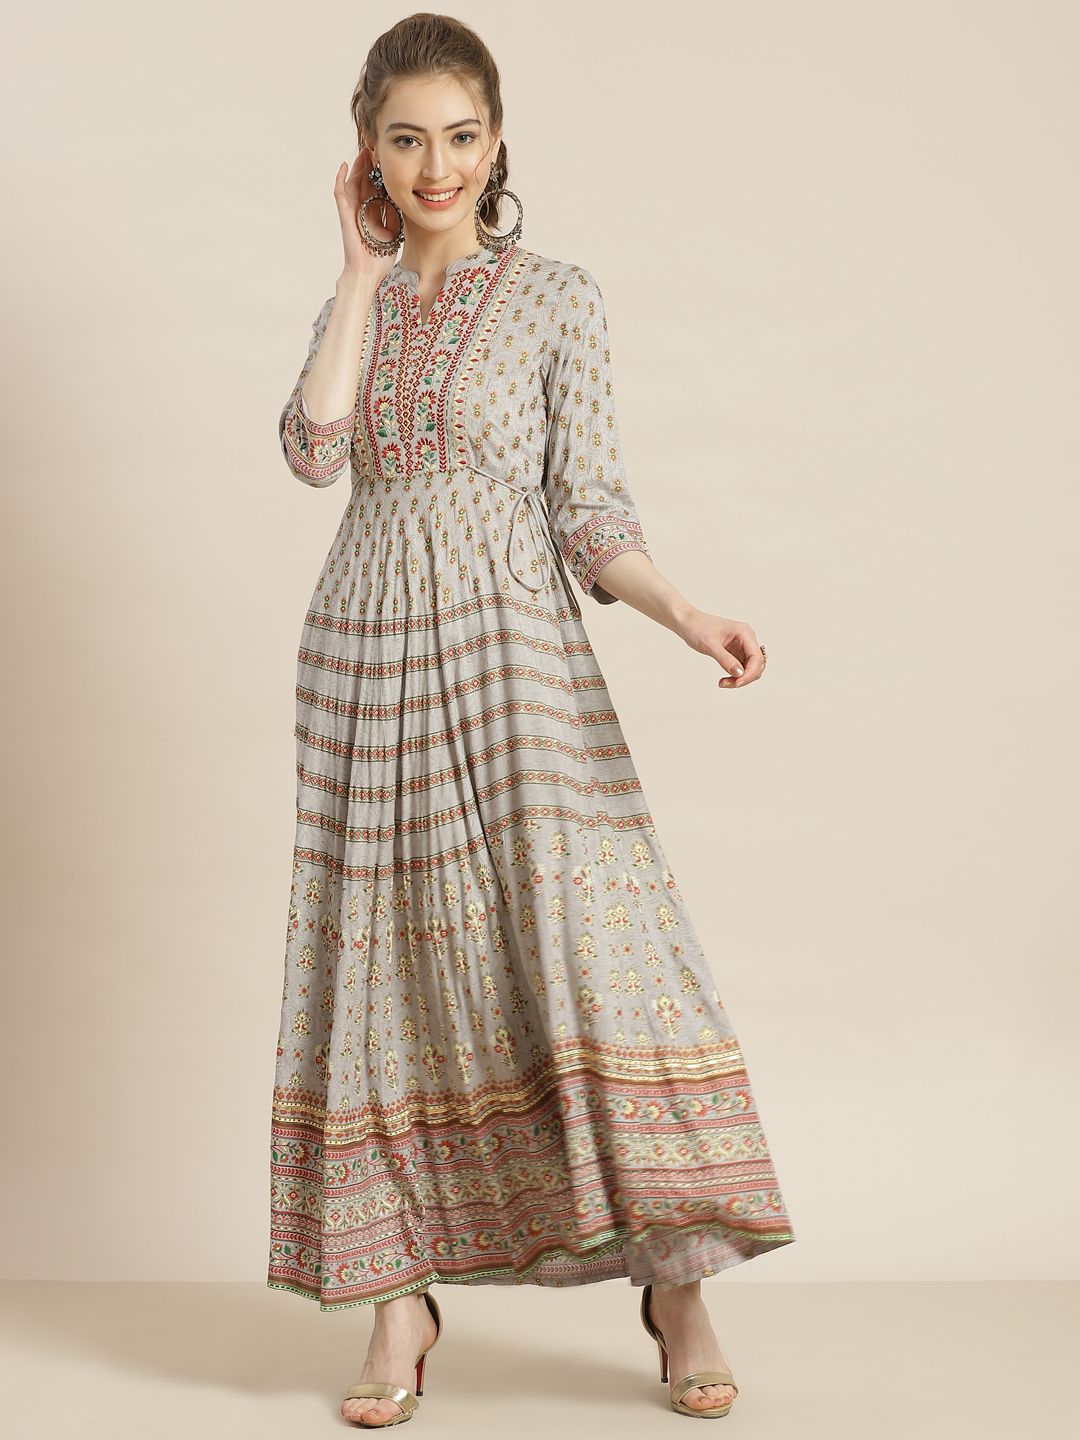 Juniper Grey & Maroon Ethnic Motifs Peinted Liva Ethnic Maxi Dress With Embroidered Detail Price in India